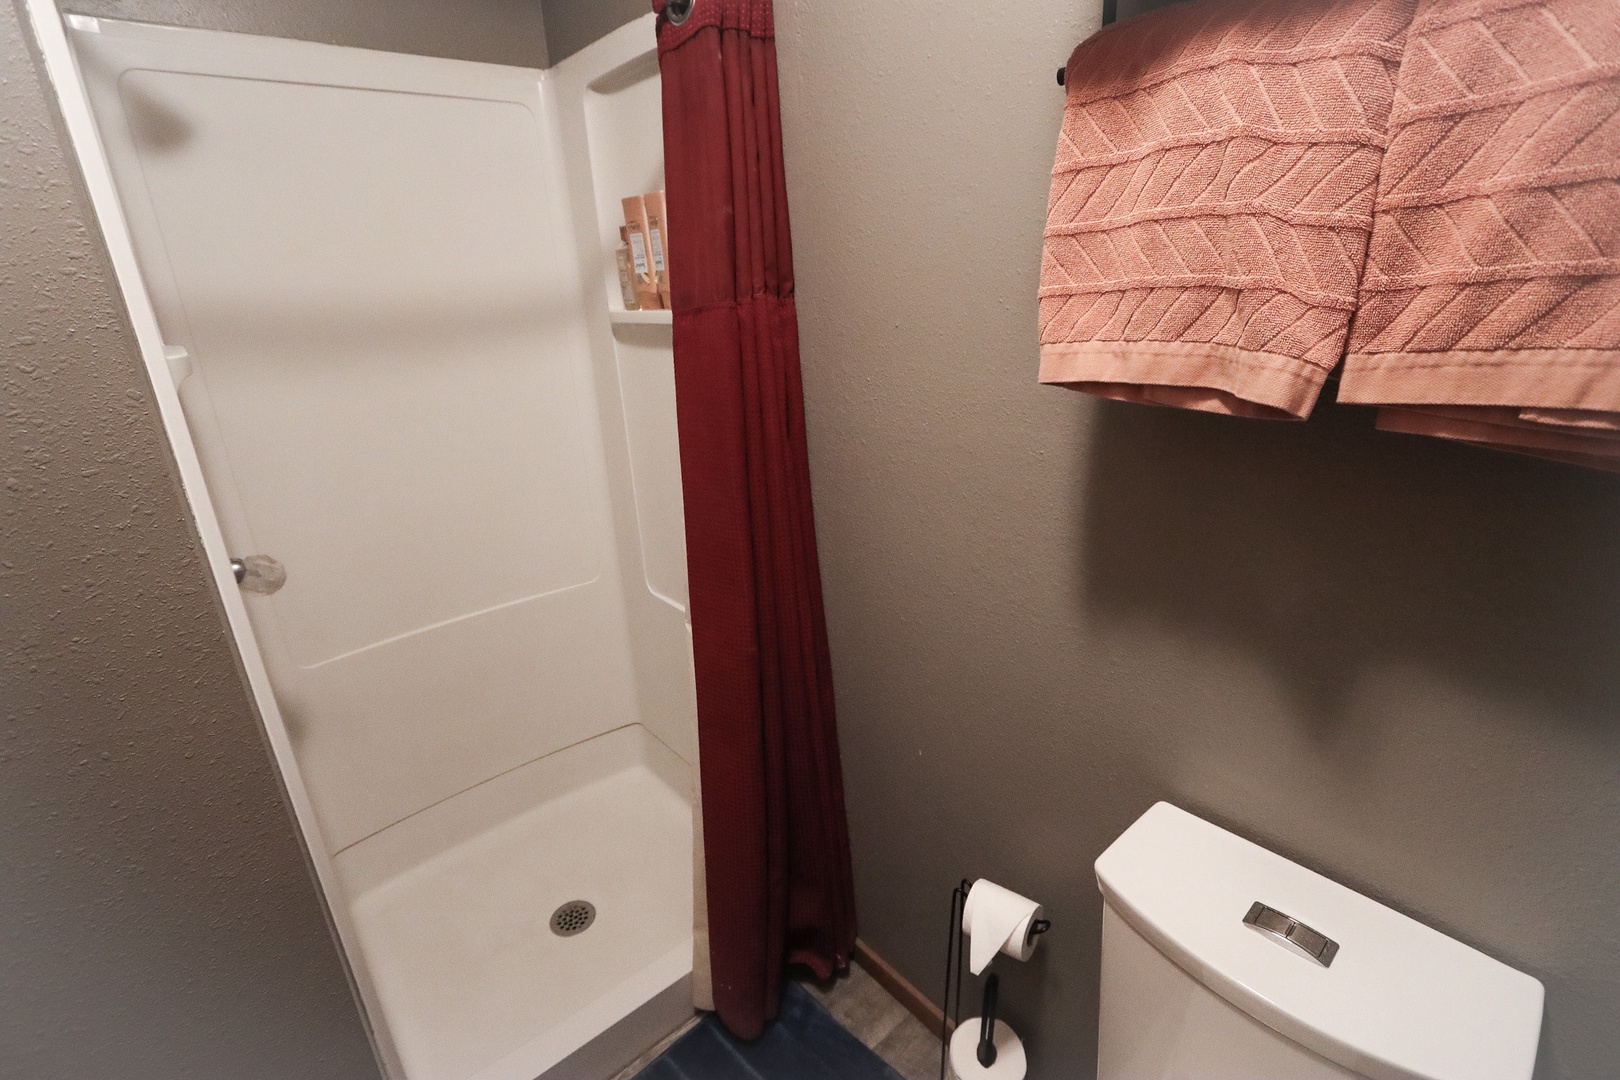 Shared bathroom with stand-up shower